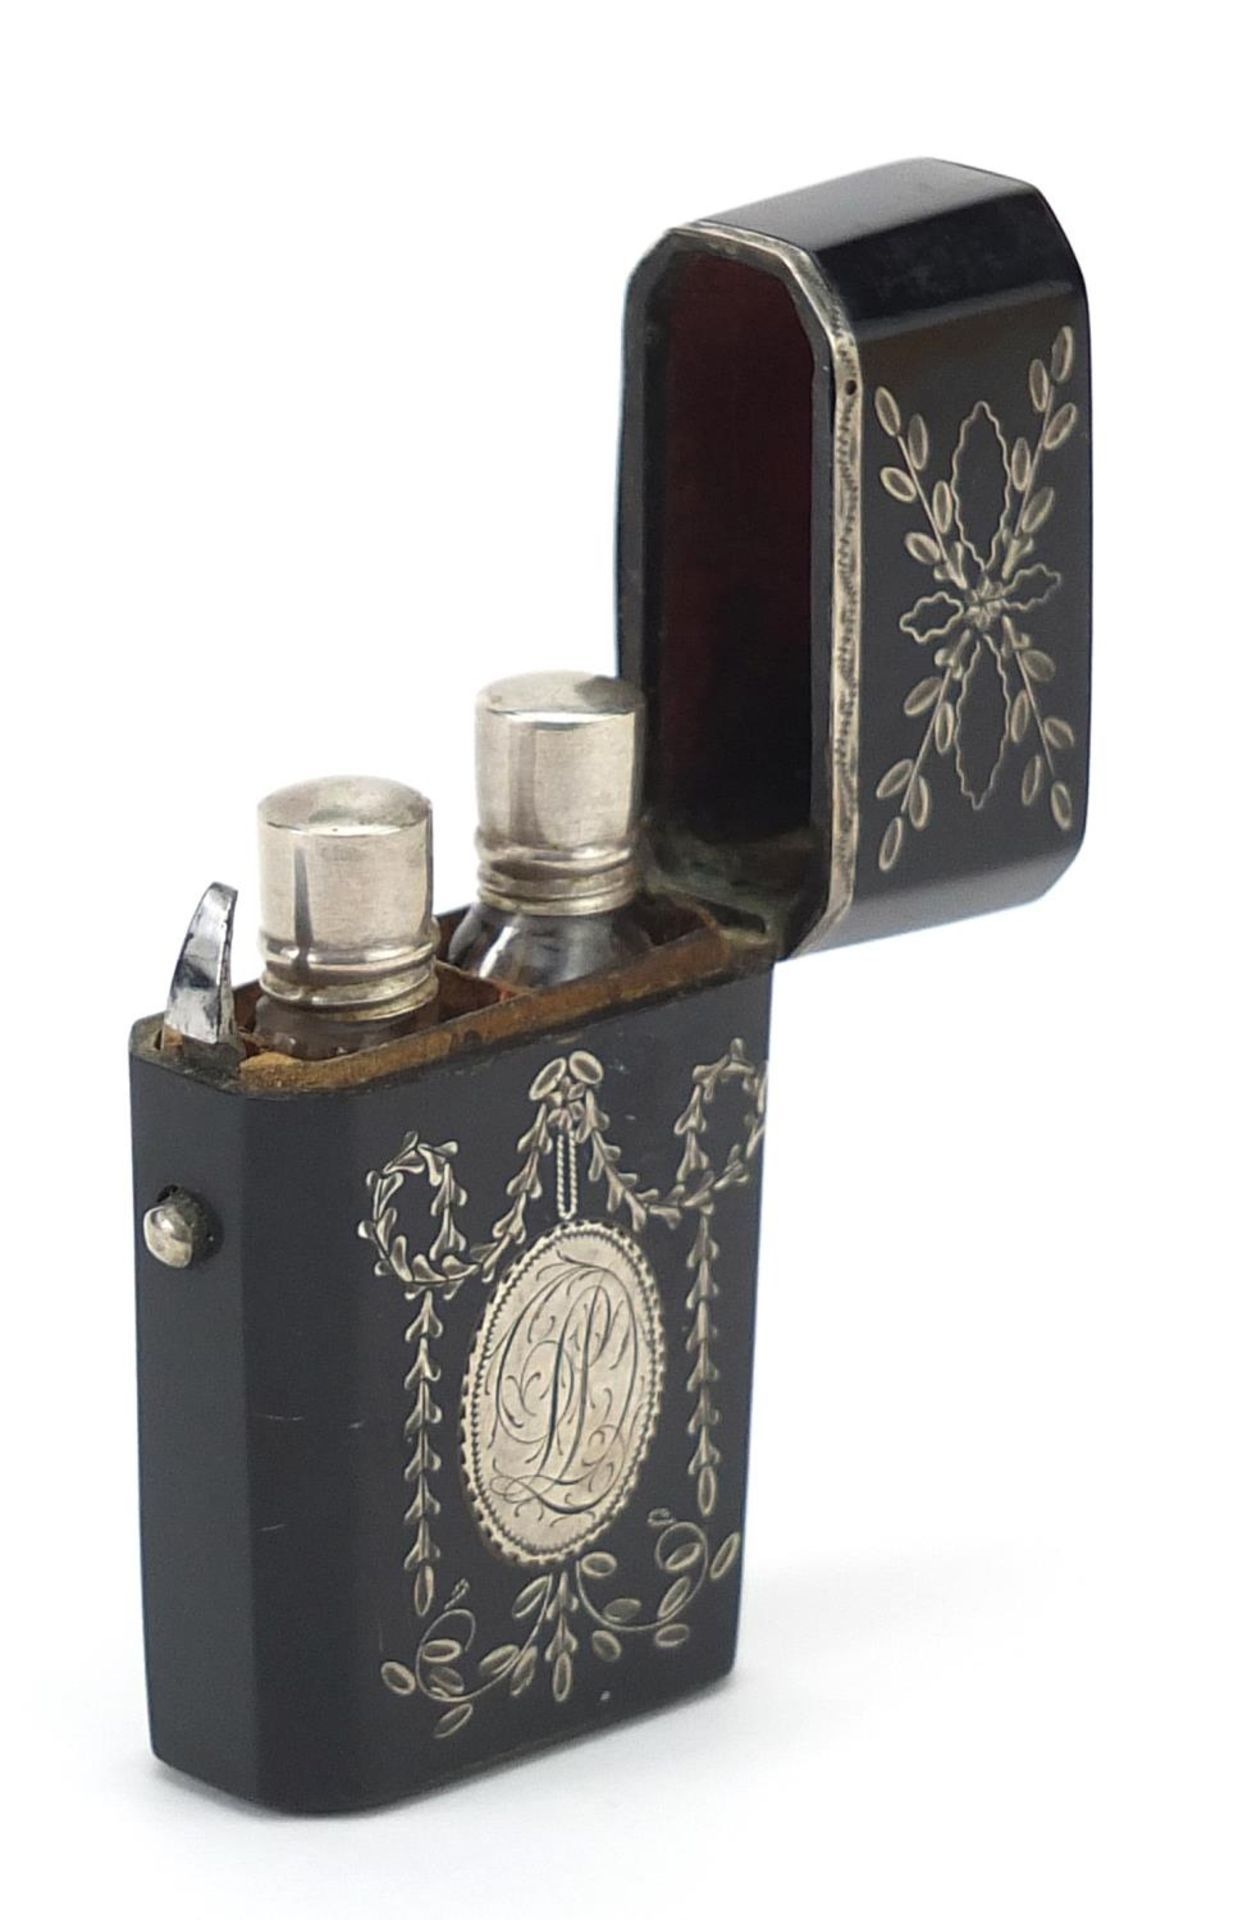 18th century tortoiseshell and silver piquet work scent bottle etui housing two glass scent - Image 4 of 5